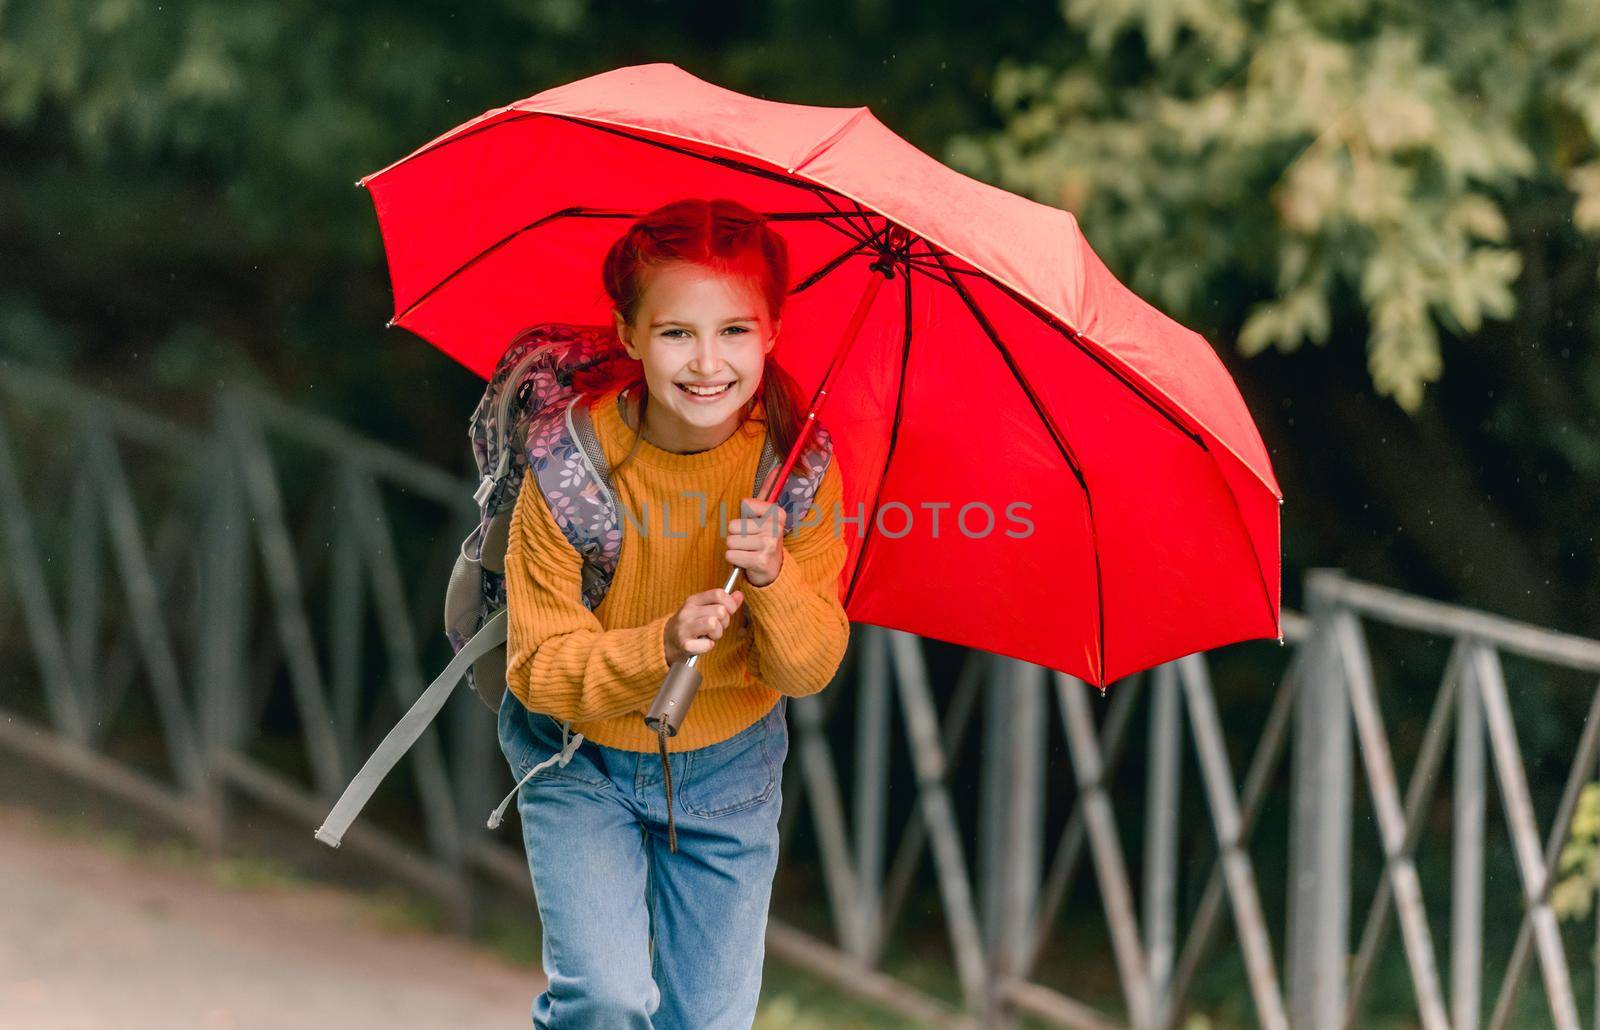 School girl with backpack and umbrella outdoors. Pretty child kid walking in rainy weather